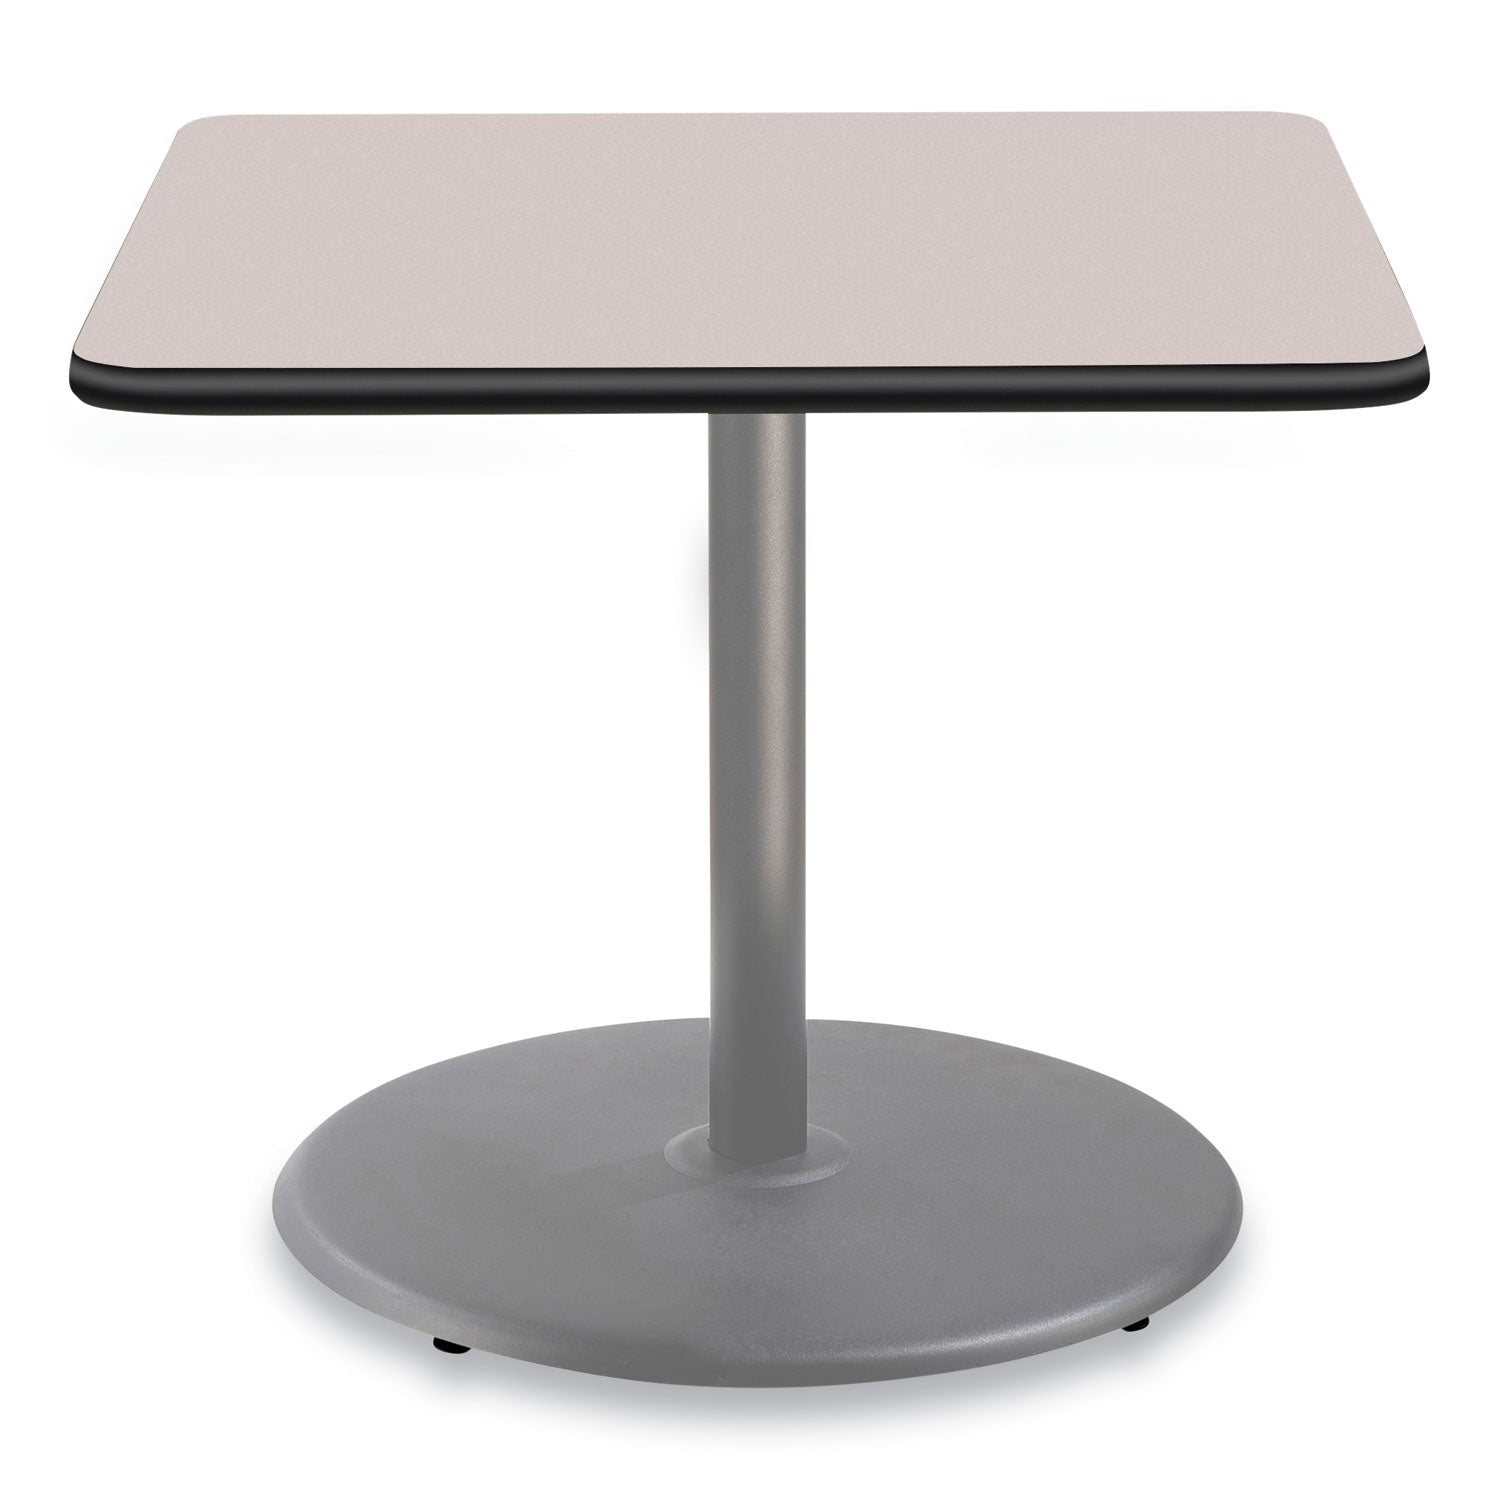 cafe-table-36w-x-36d-x-30h-square-top-round-base-gray-nebula-top-gray-base-ships-in-7-10-business-days_npscg33636rd1gy - 2